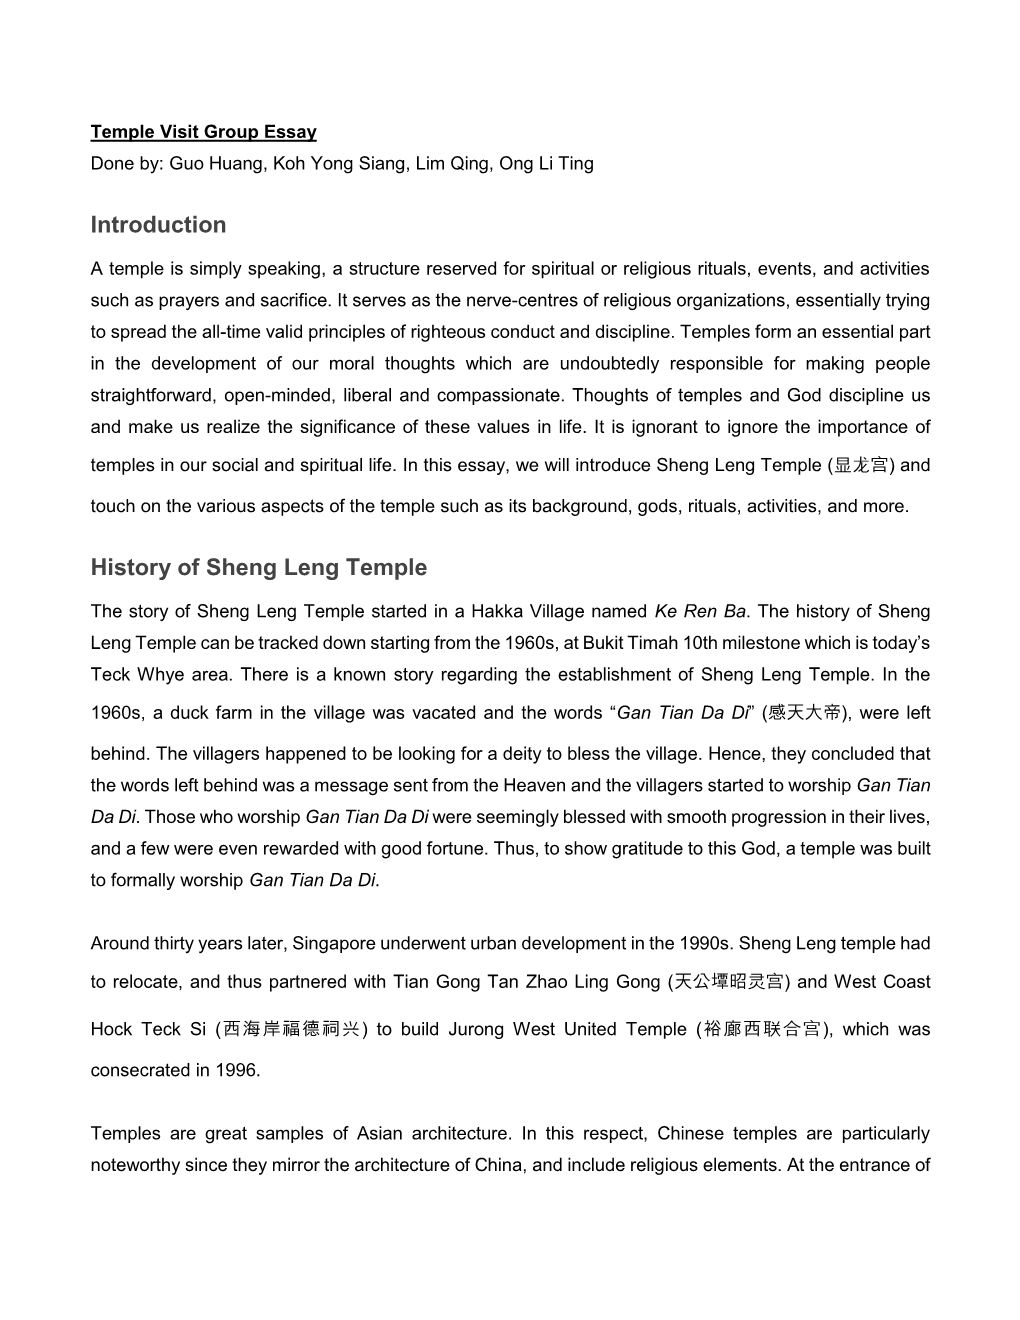 Introduction History of Sheng Leng Temple